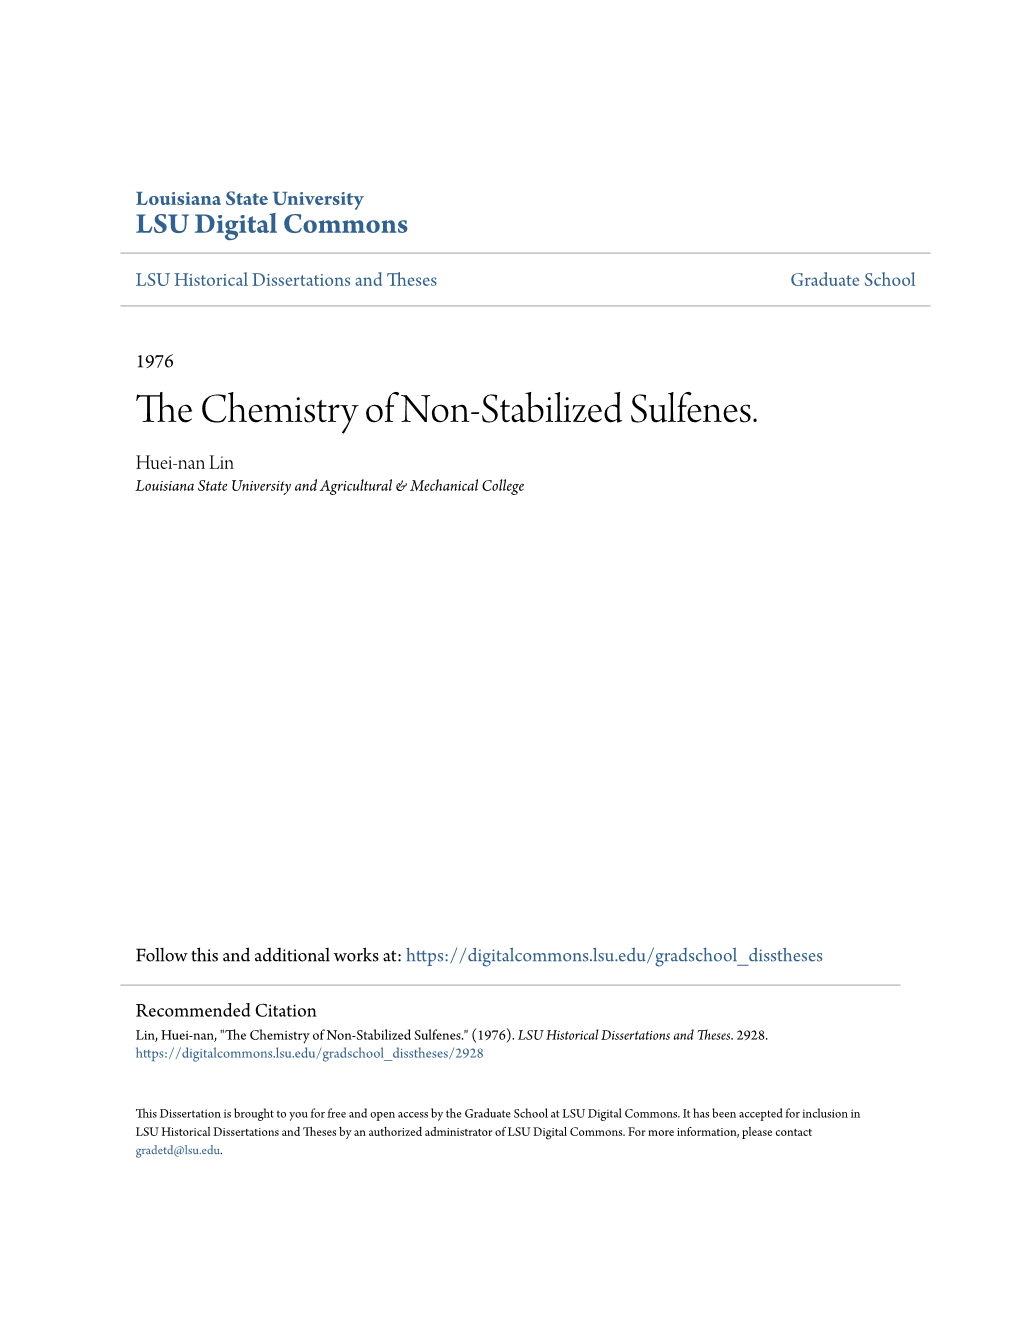 The Chemistry of Non-Stabilized Sulfenes